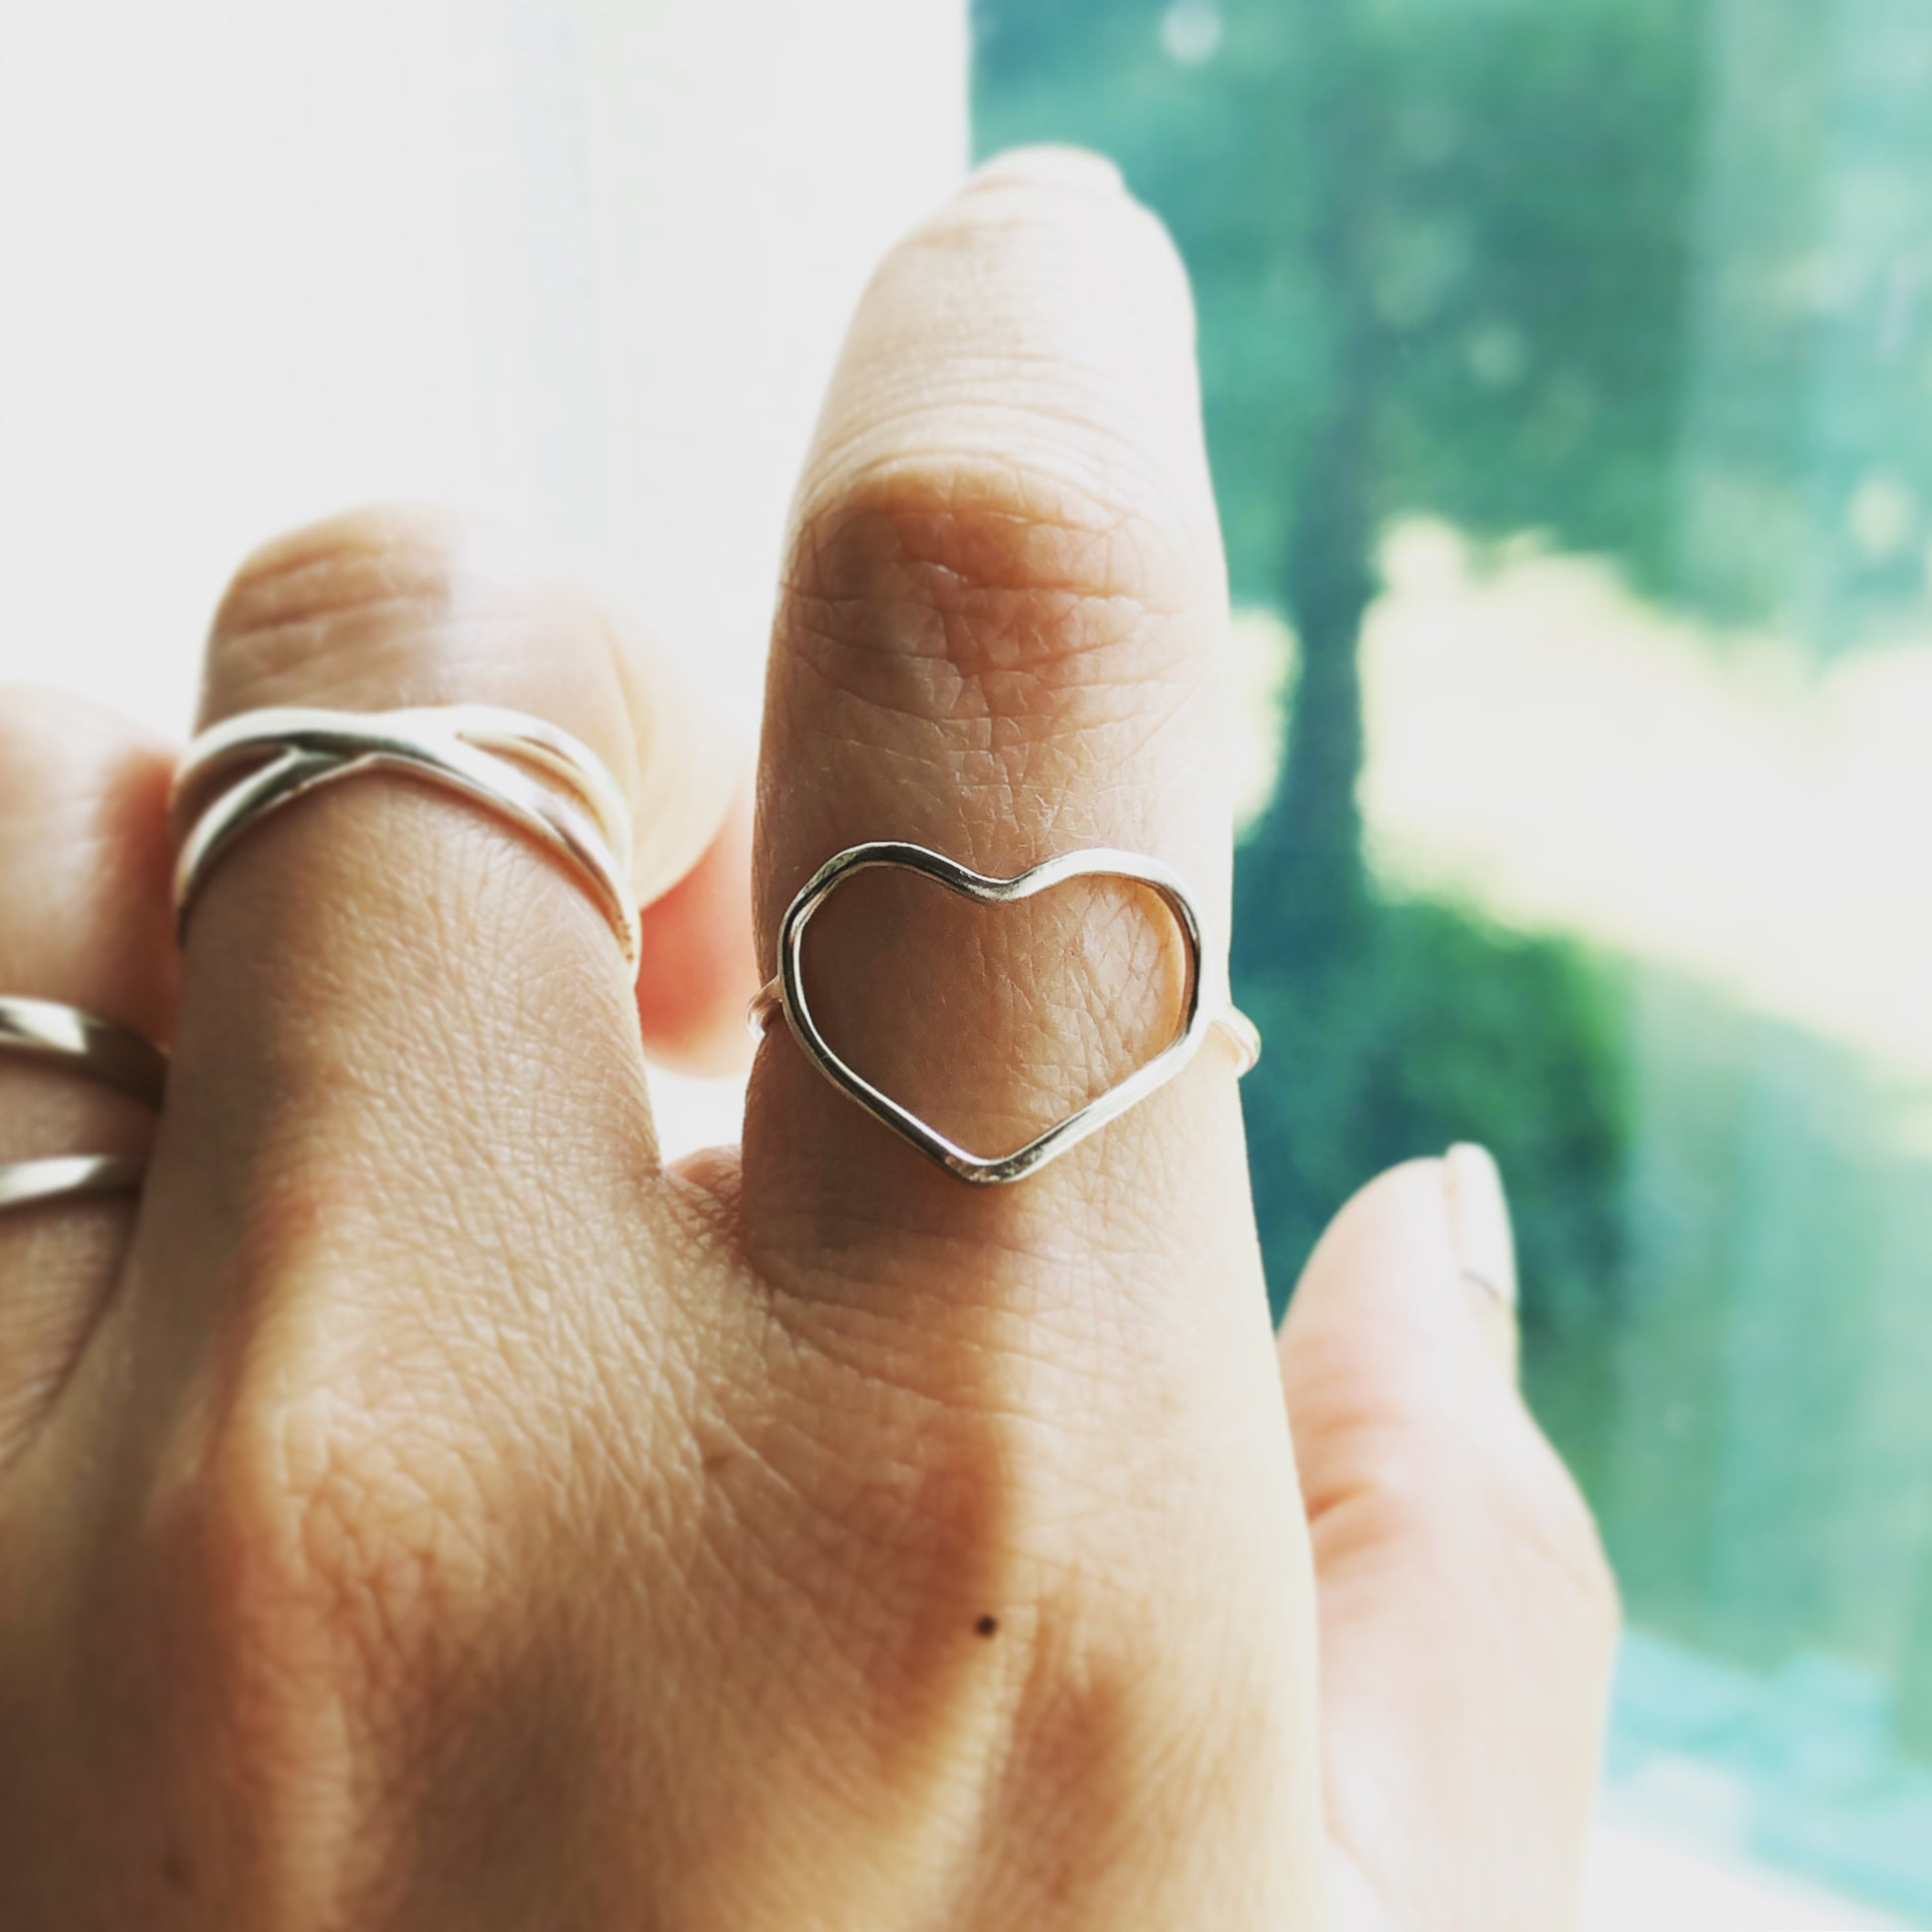 Heart Ring, Open Heart Ring, Sterling Silver Ring, Handmade Ring, Silver Open Heart Ring, Stacking Ring, Dainty Heart Ring, Gift For Her